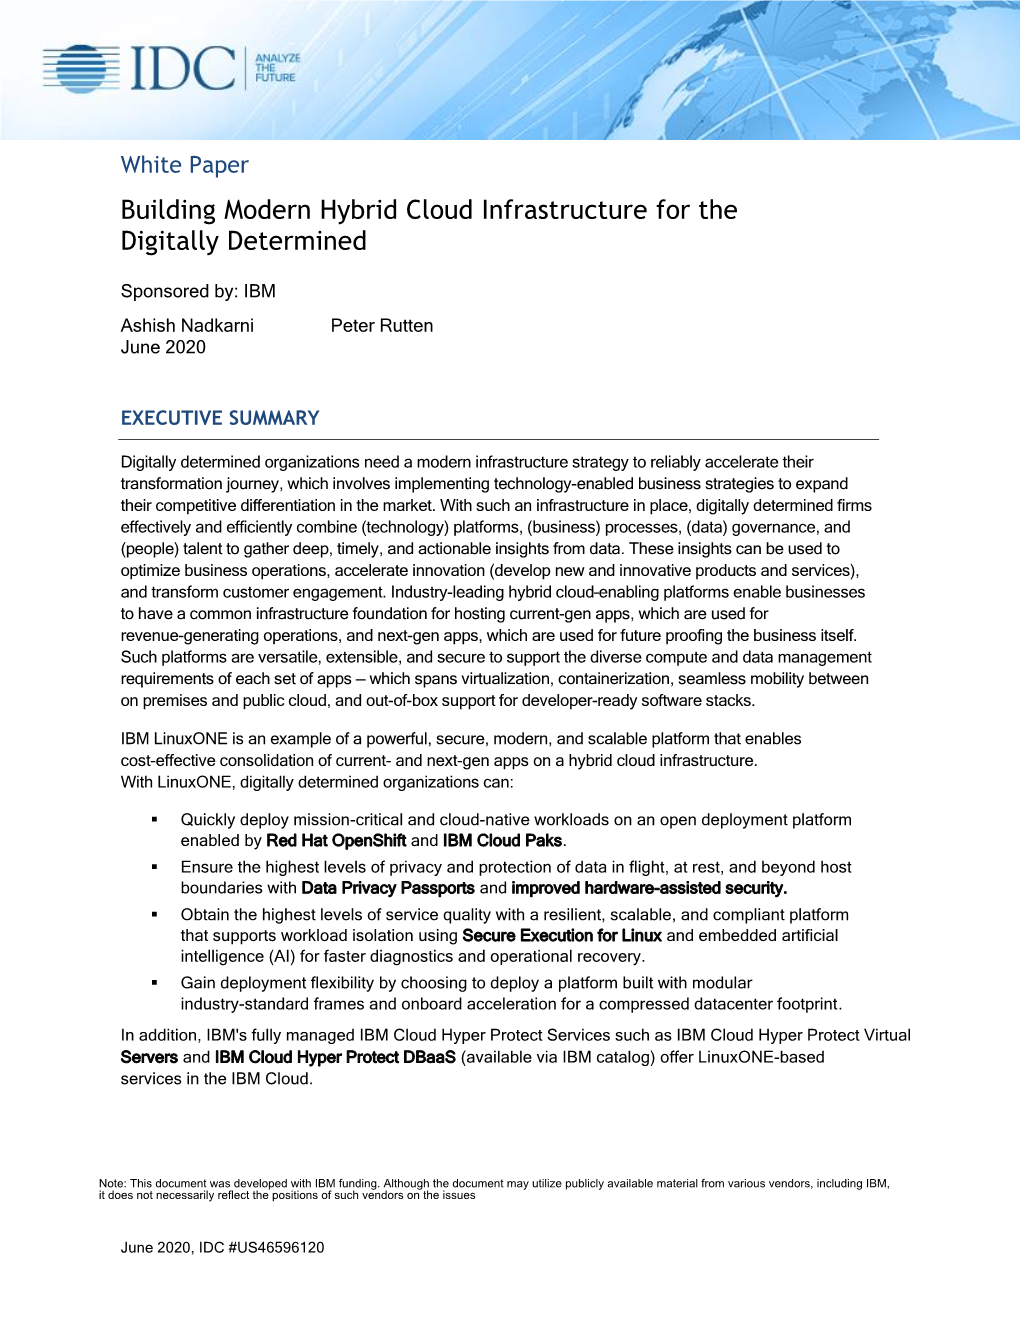 Building Modern Hybrid Cloud Infrastructure for the Digitally Determined